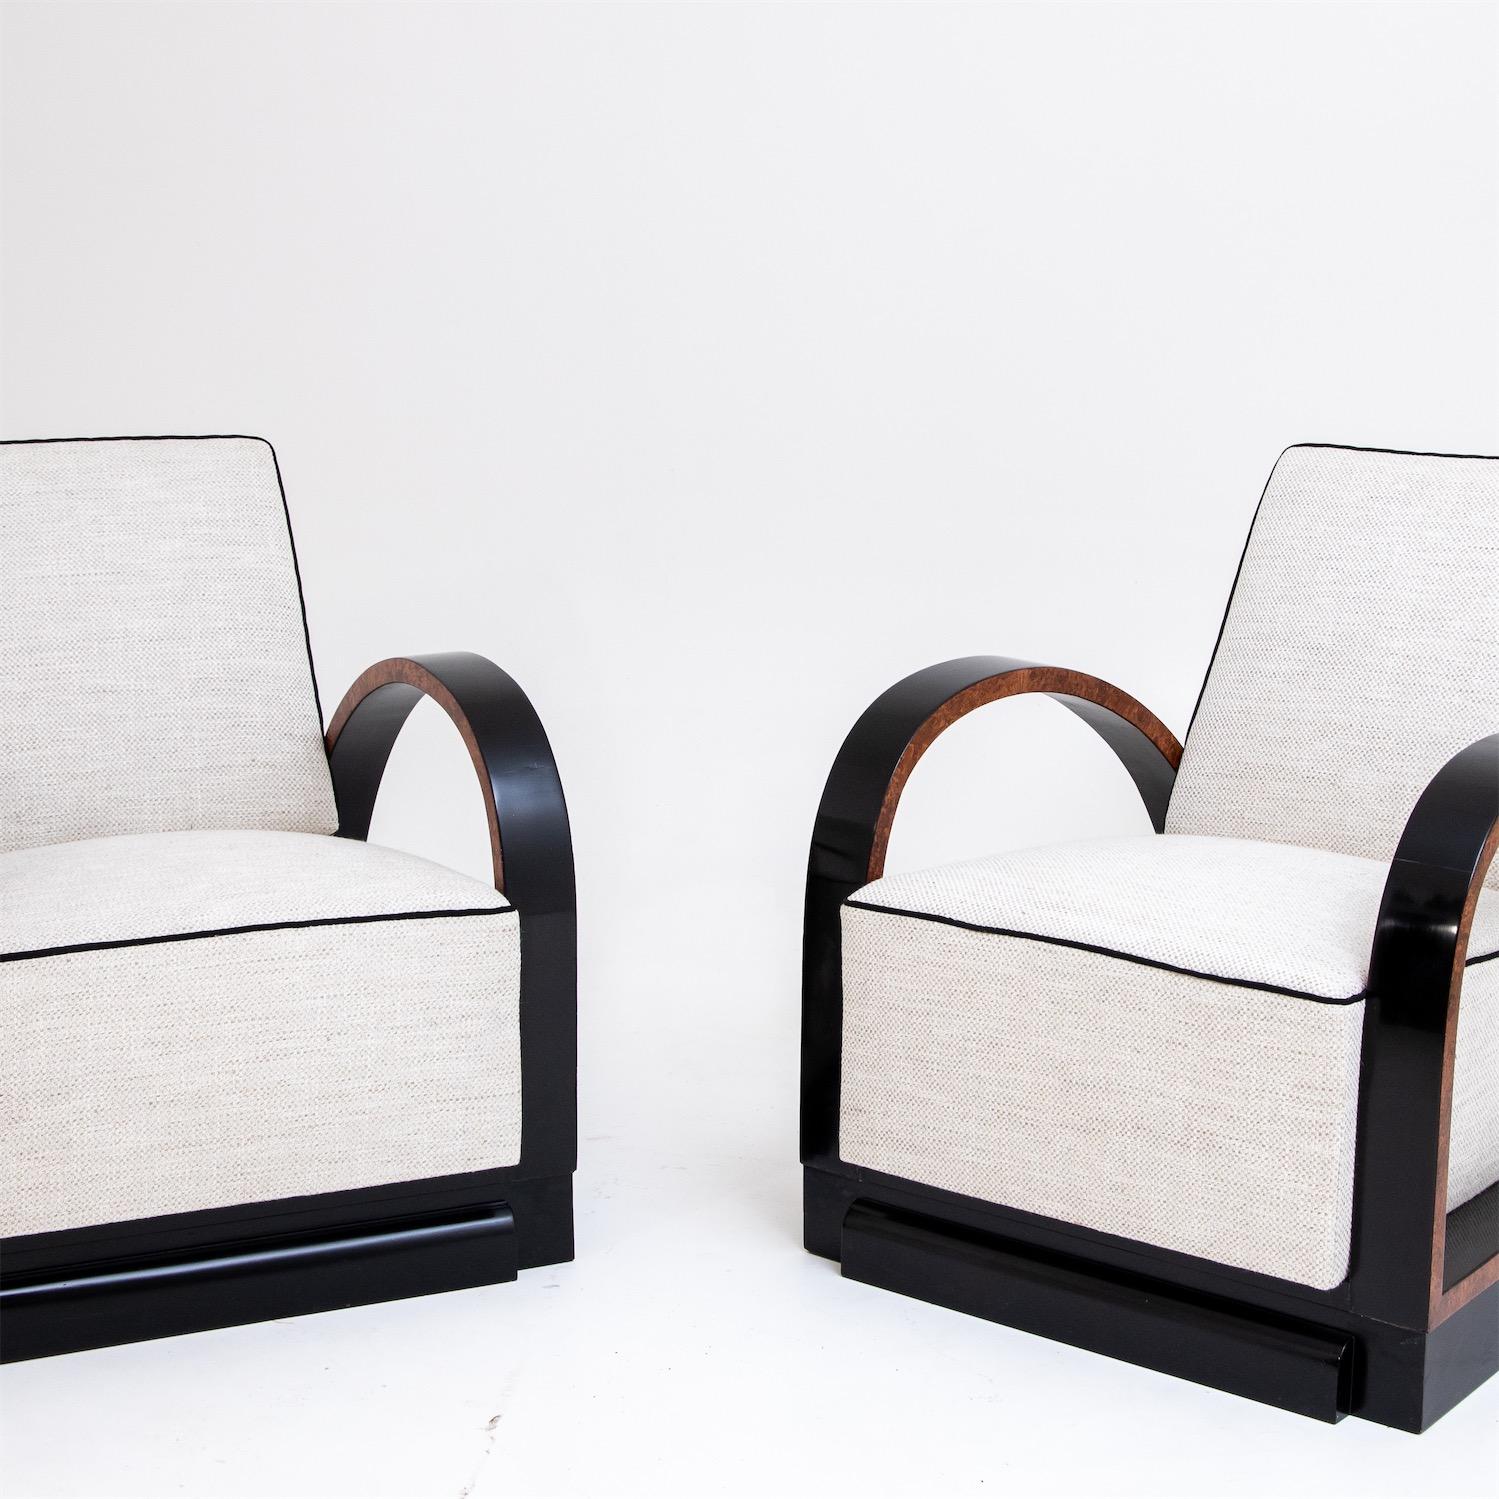 Walnut Pair of Art Deco Lounge Chairs, France, 1920s